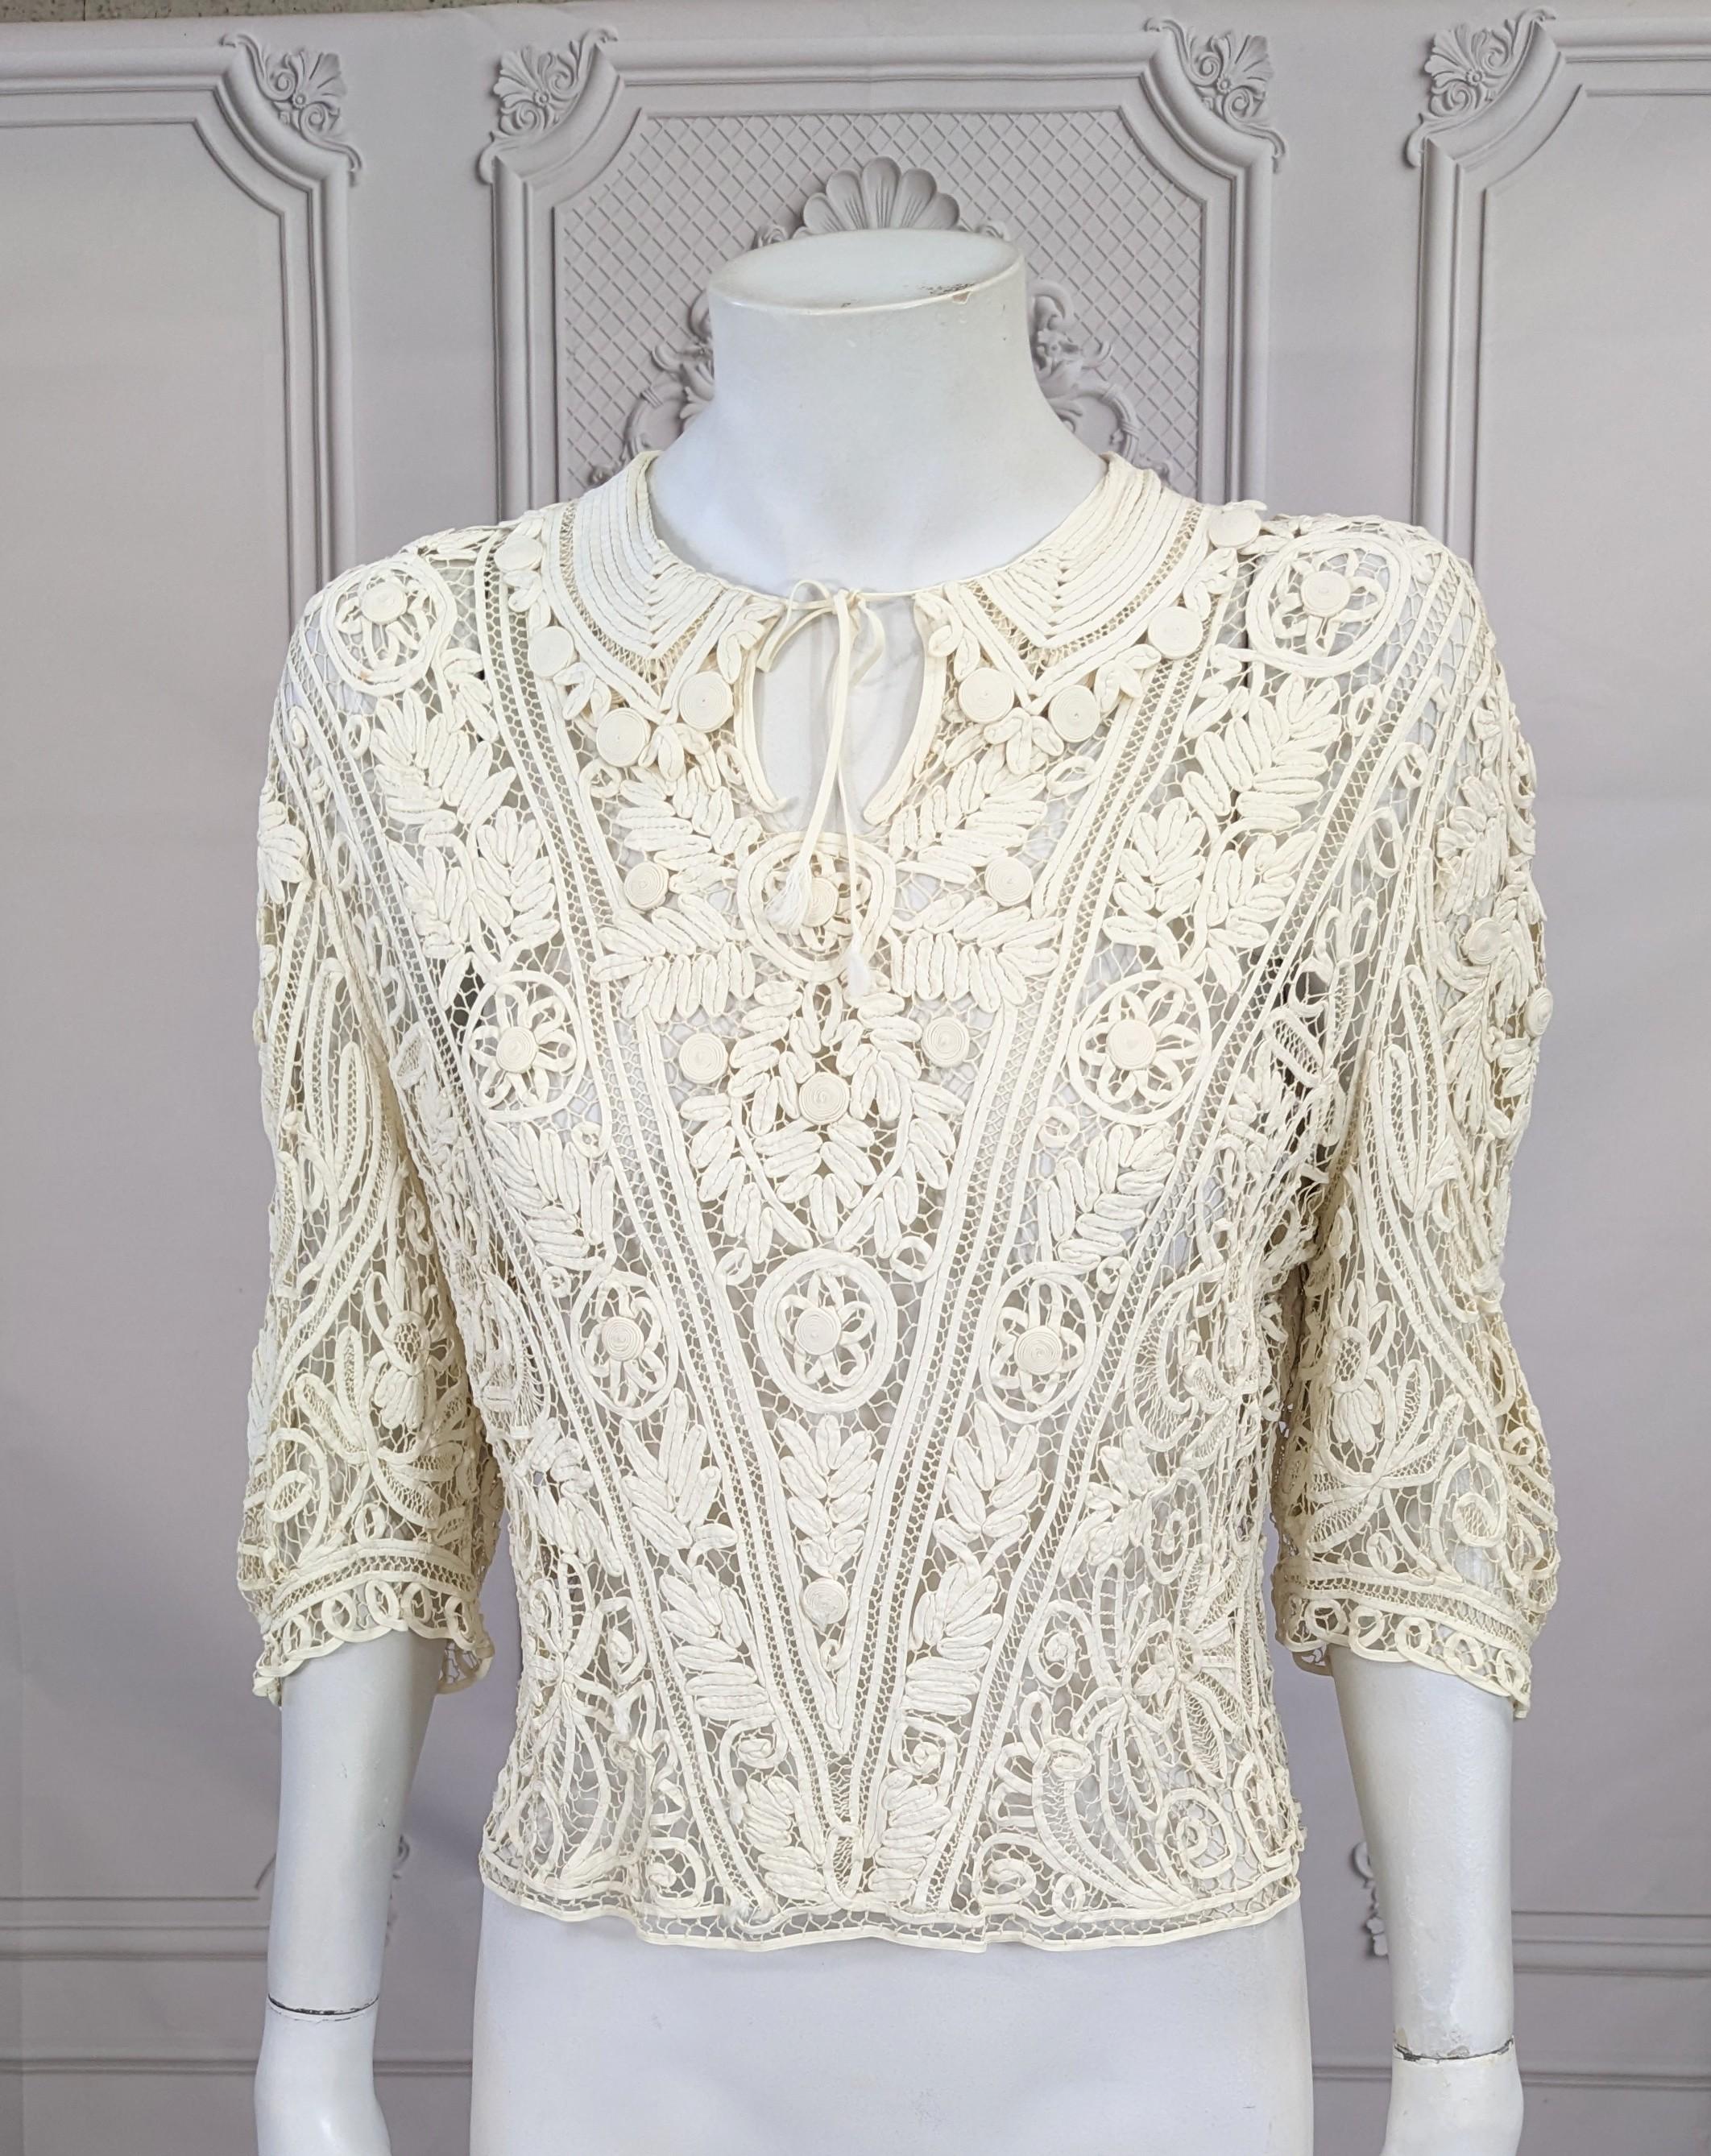 Belgian Art Deco Bias Tape Lace Blouse from the 1930's composed of many yards of bias tape manipulated and hand stitched into floral patterns and leaf forms. Completely hand made with threaded 